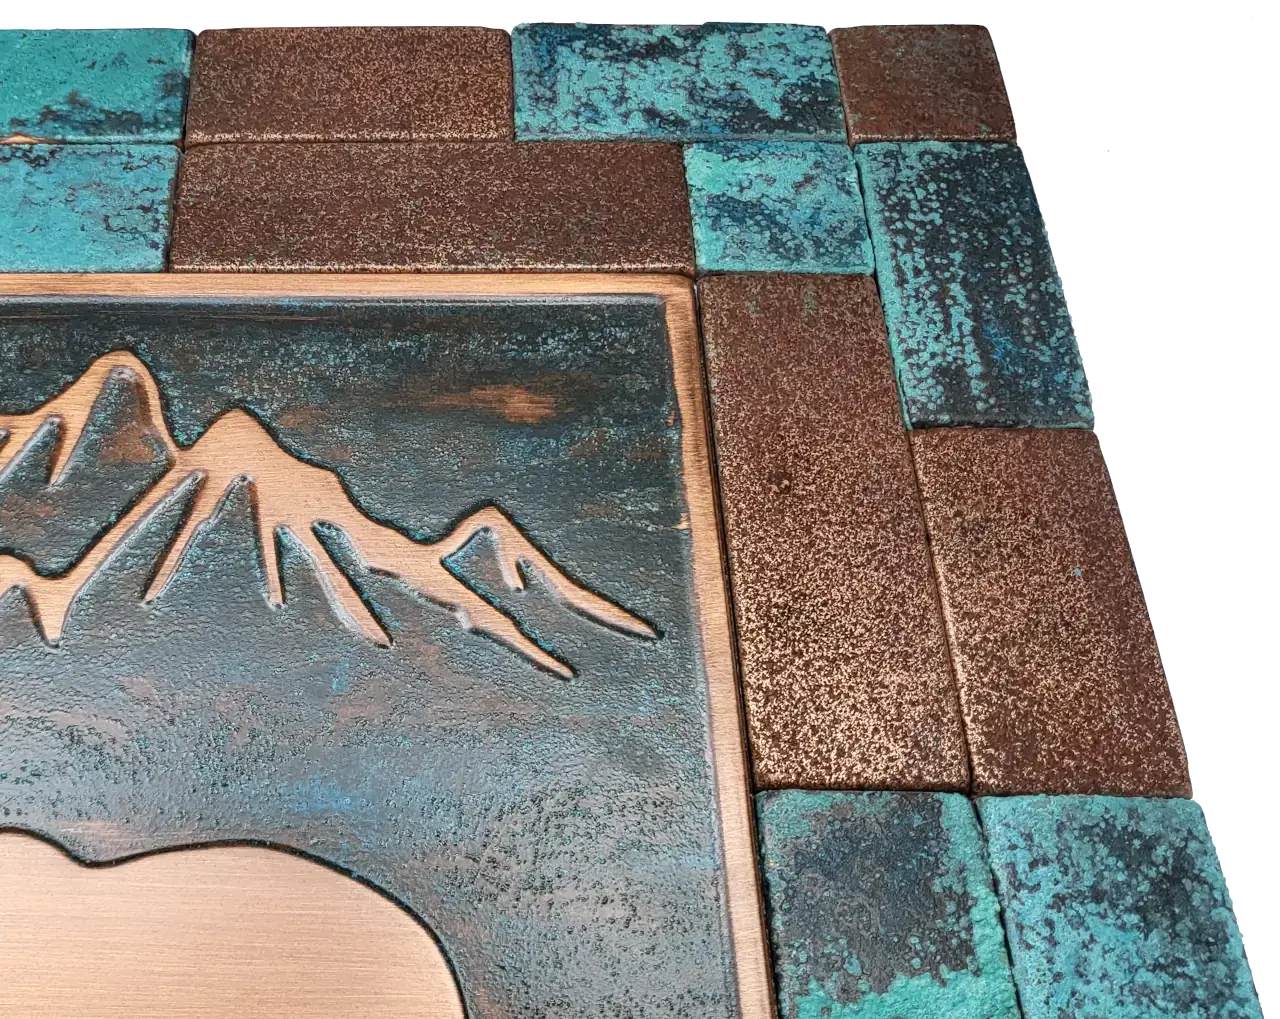 Bear and Mountains on colored copper 7 tiles